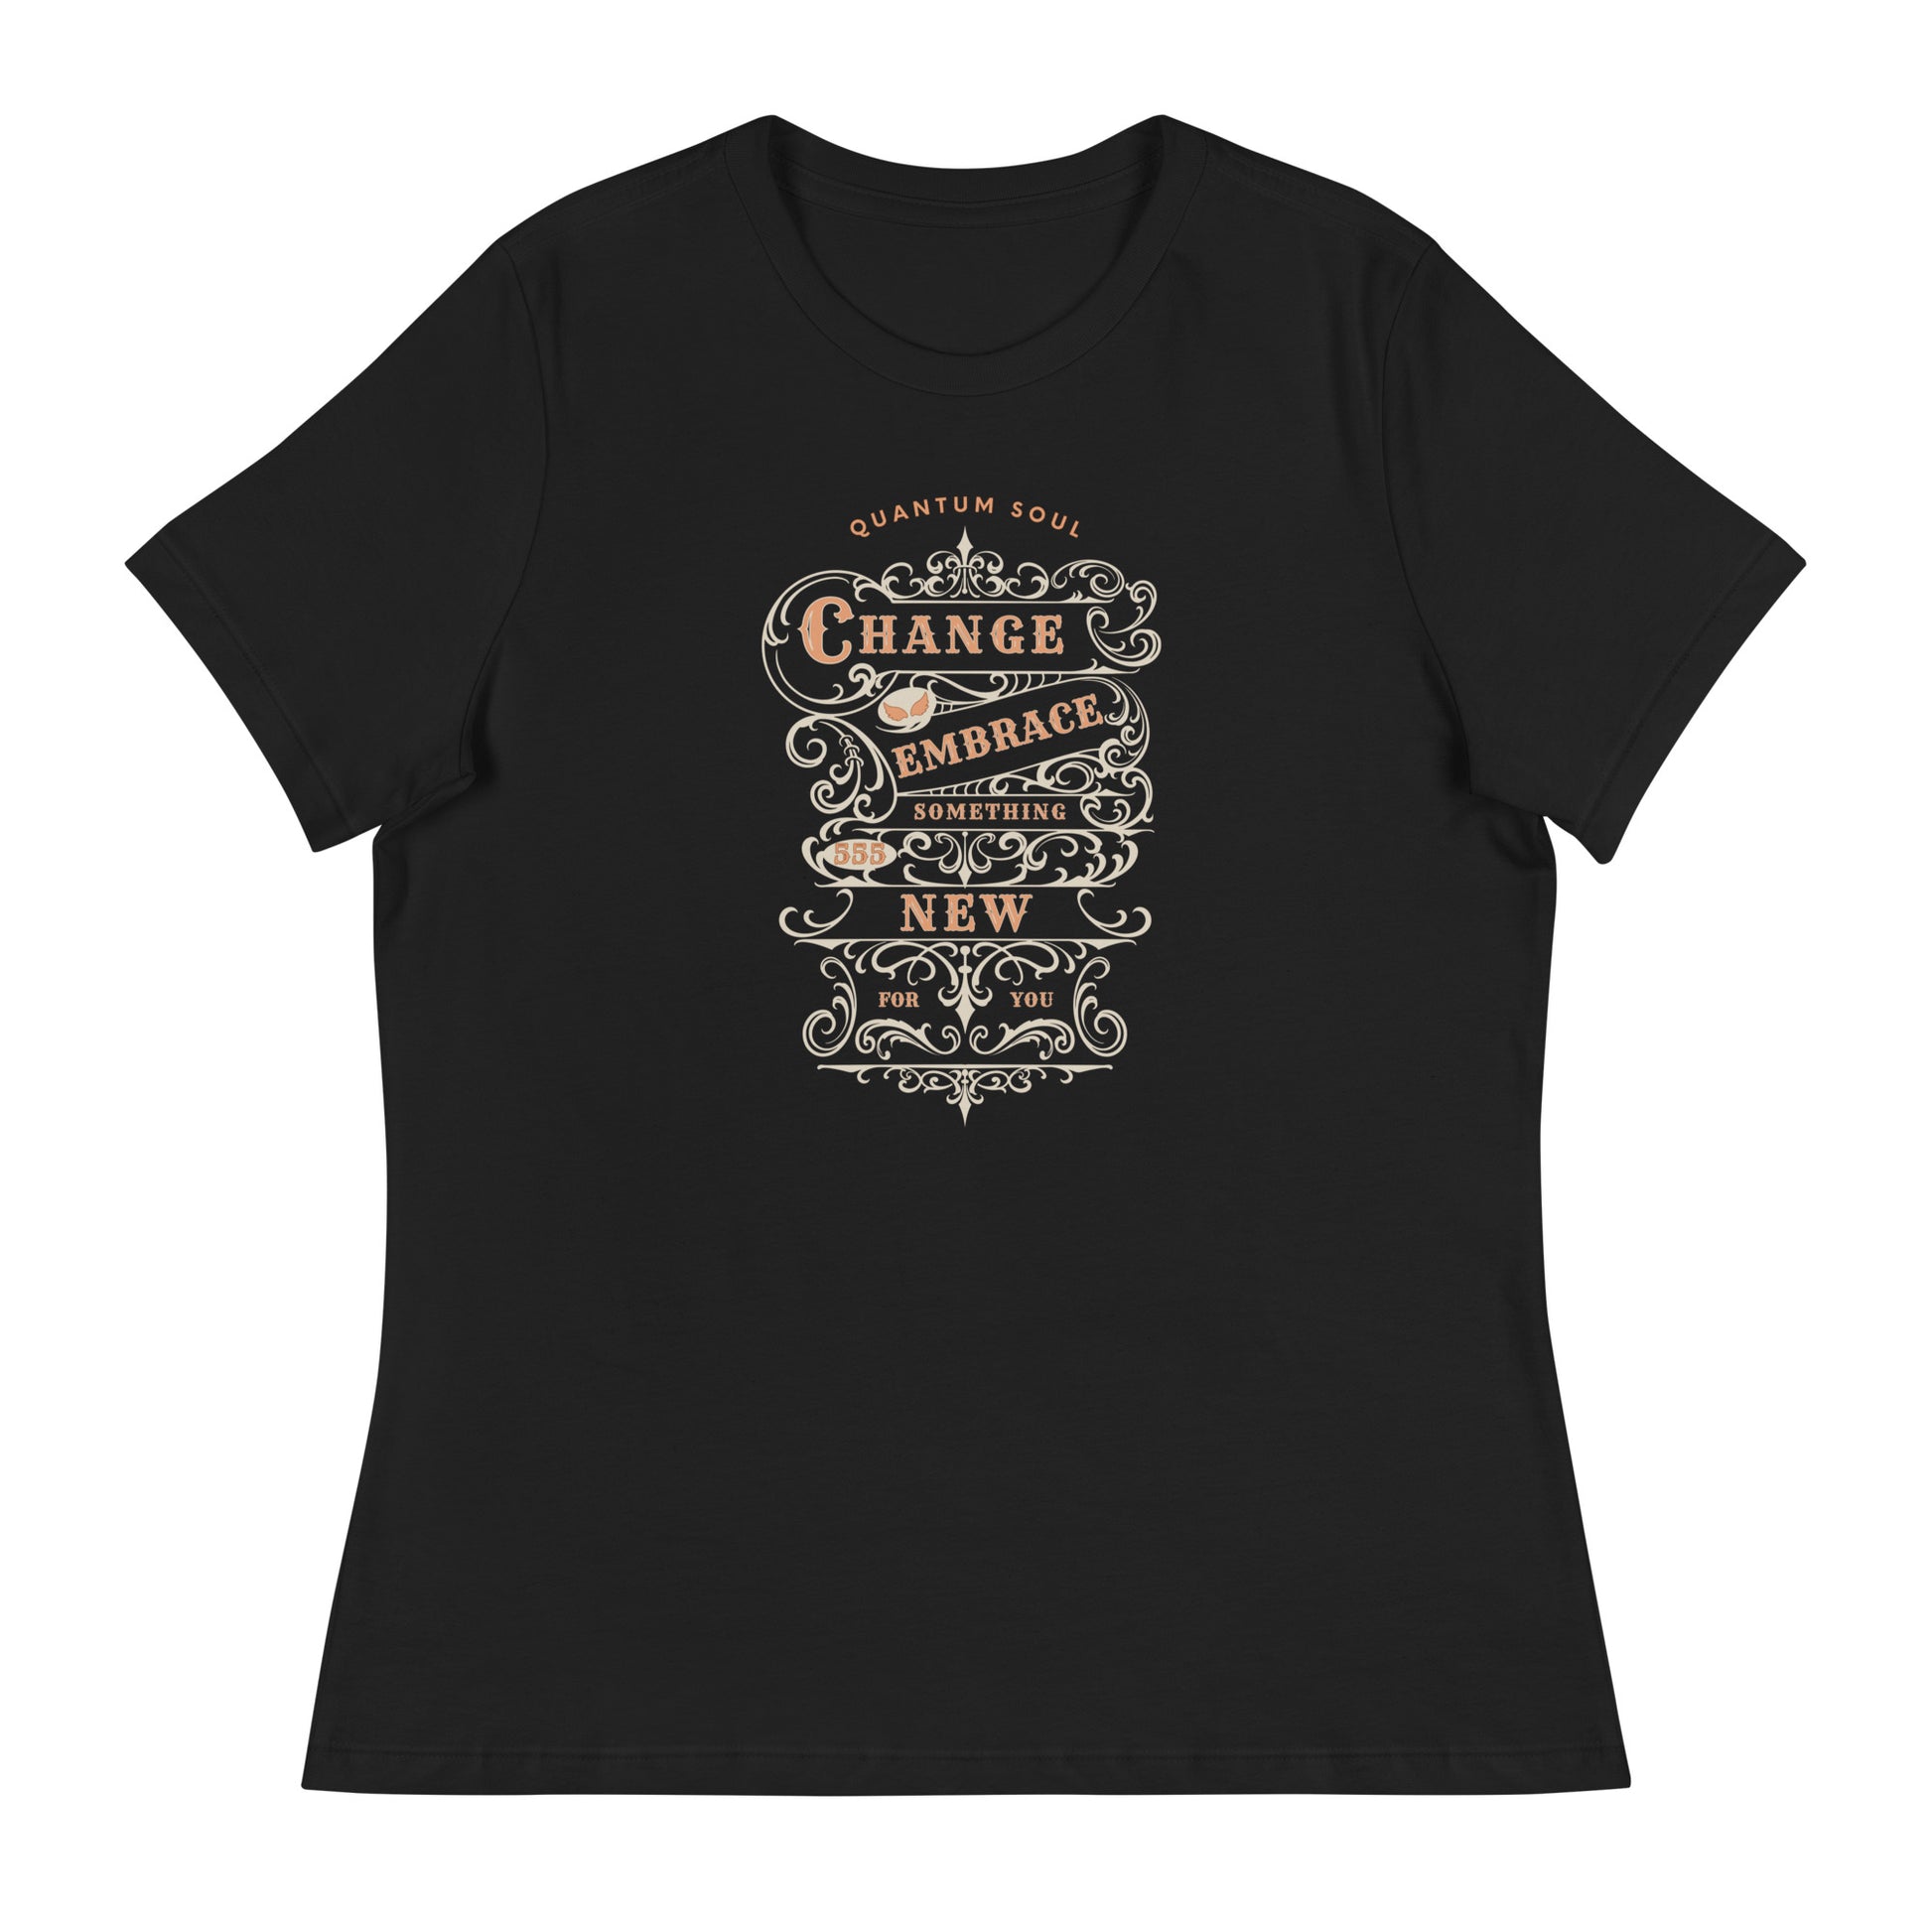 Change 555 womens-relaxed-t-shirt-black-front flat